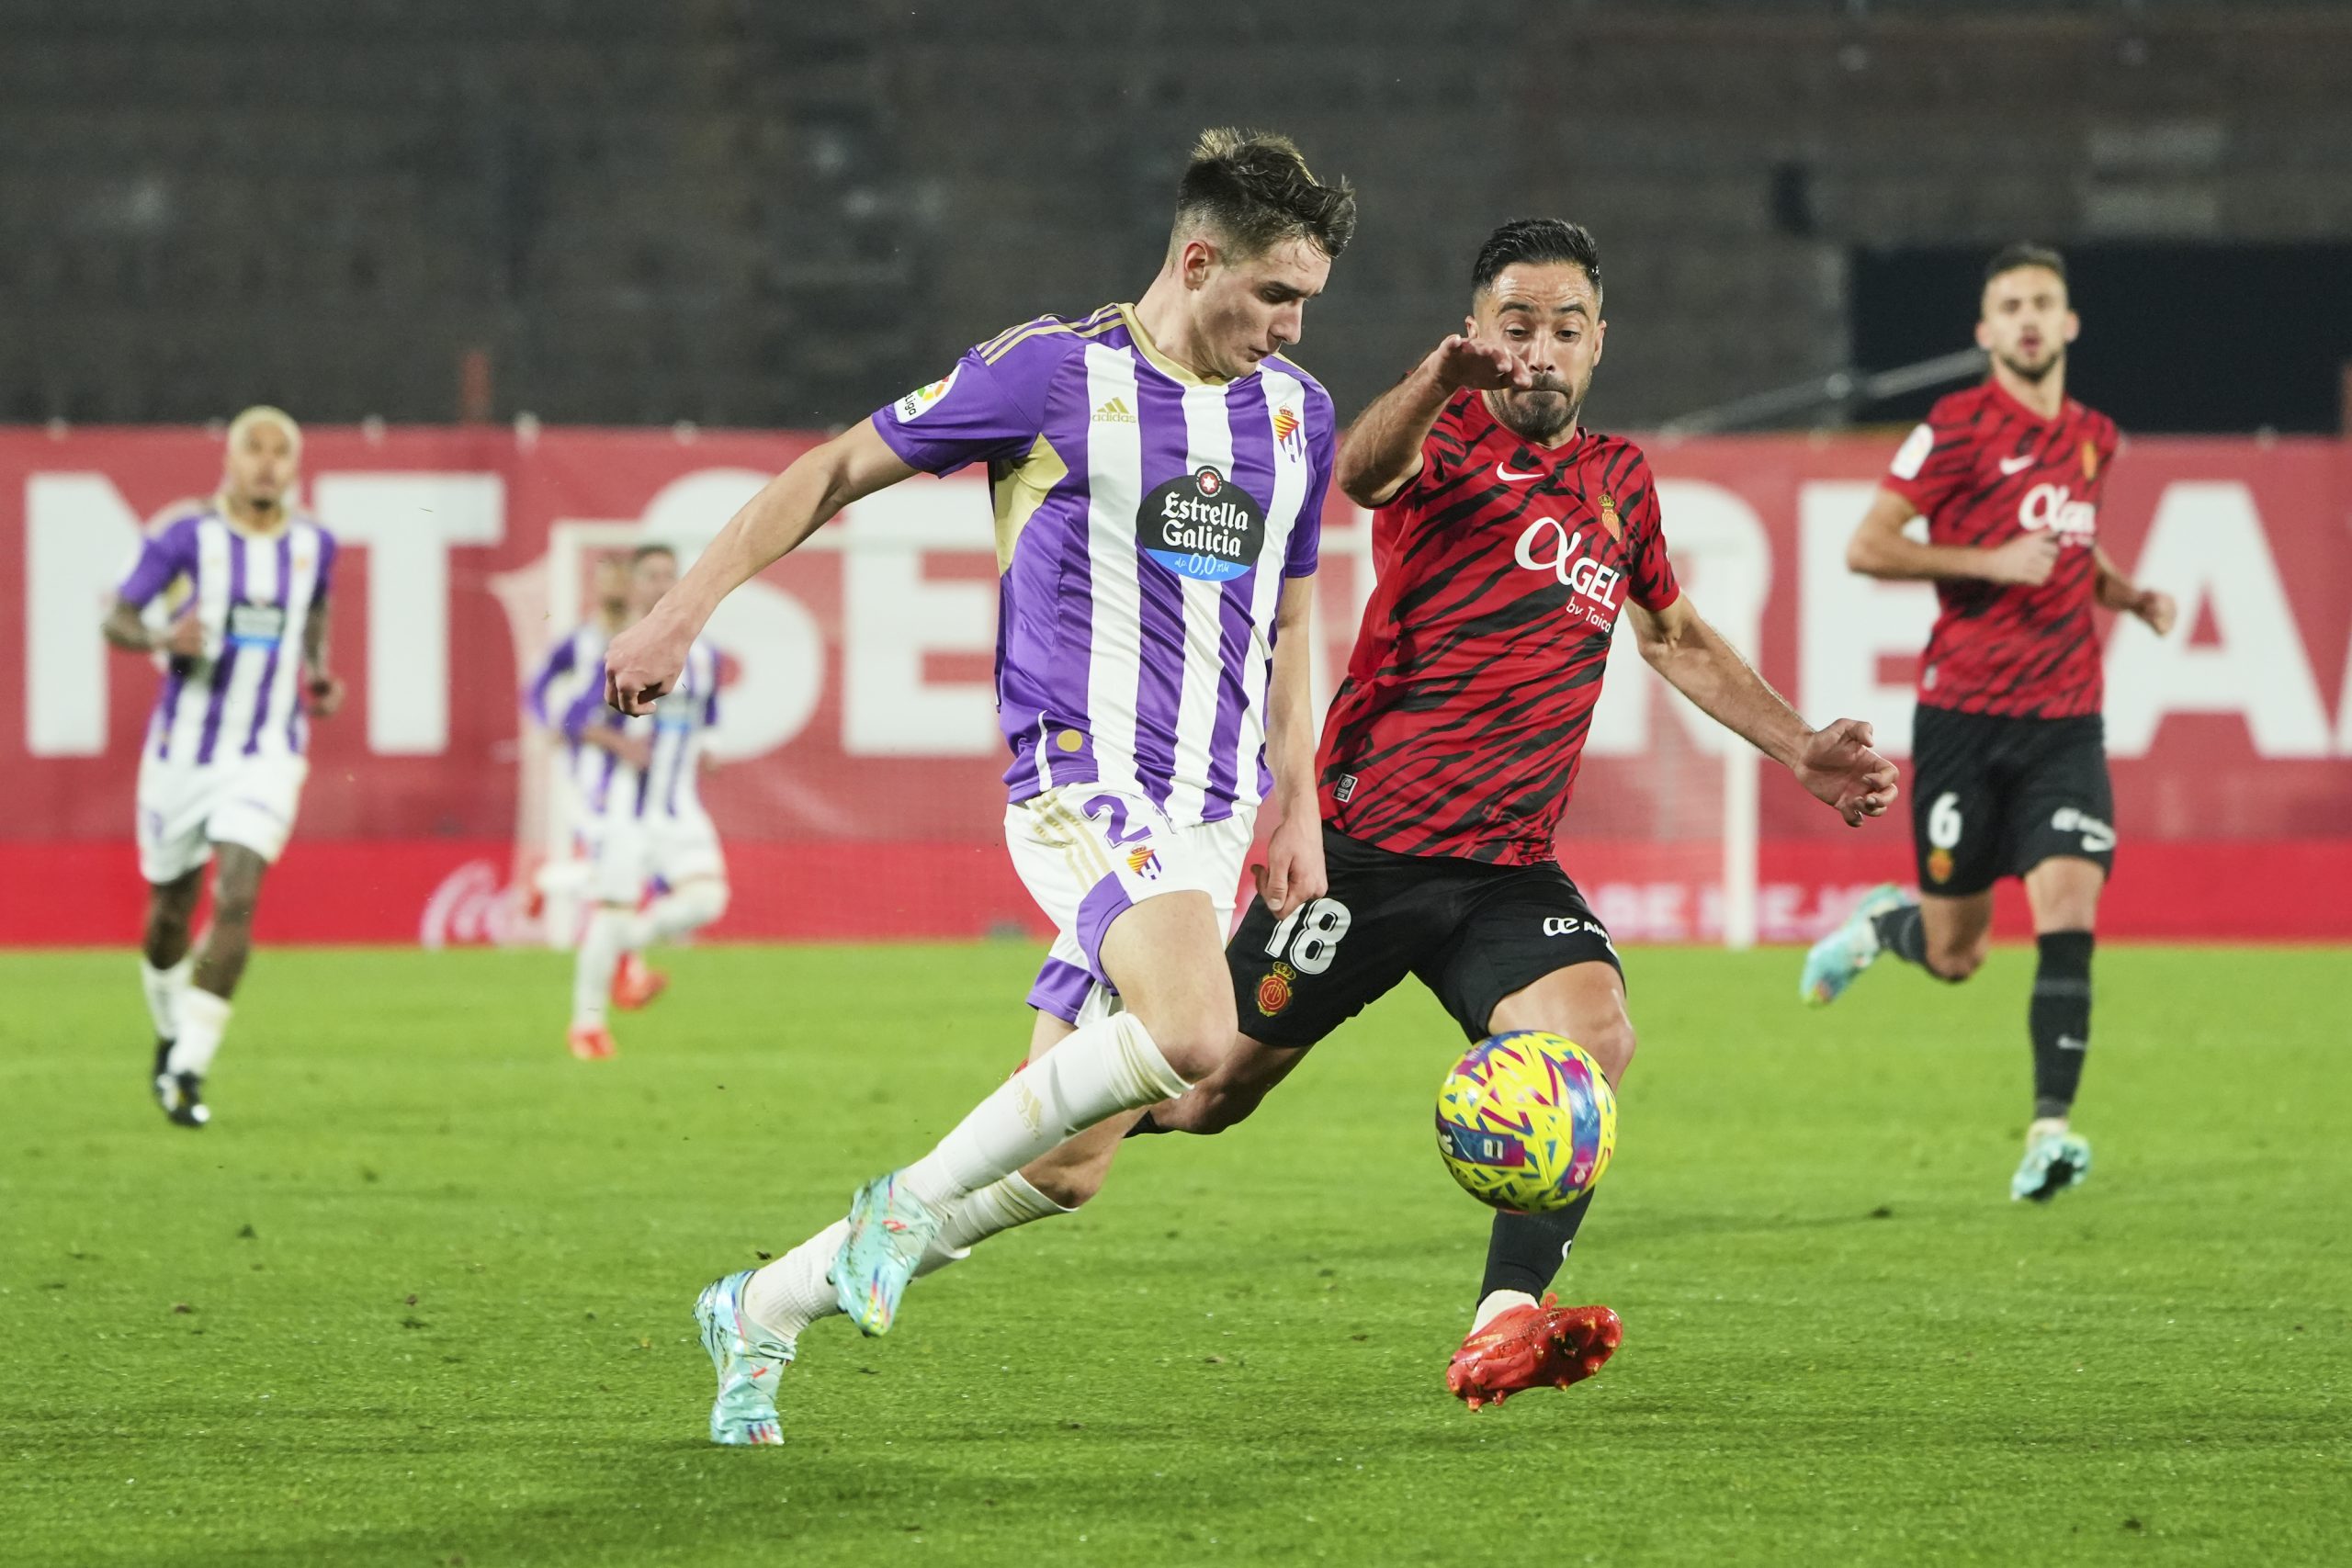 Manchester United in 'chase' for Real Valladolid full-back Ivan Fresneda.